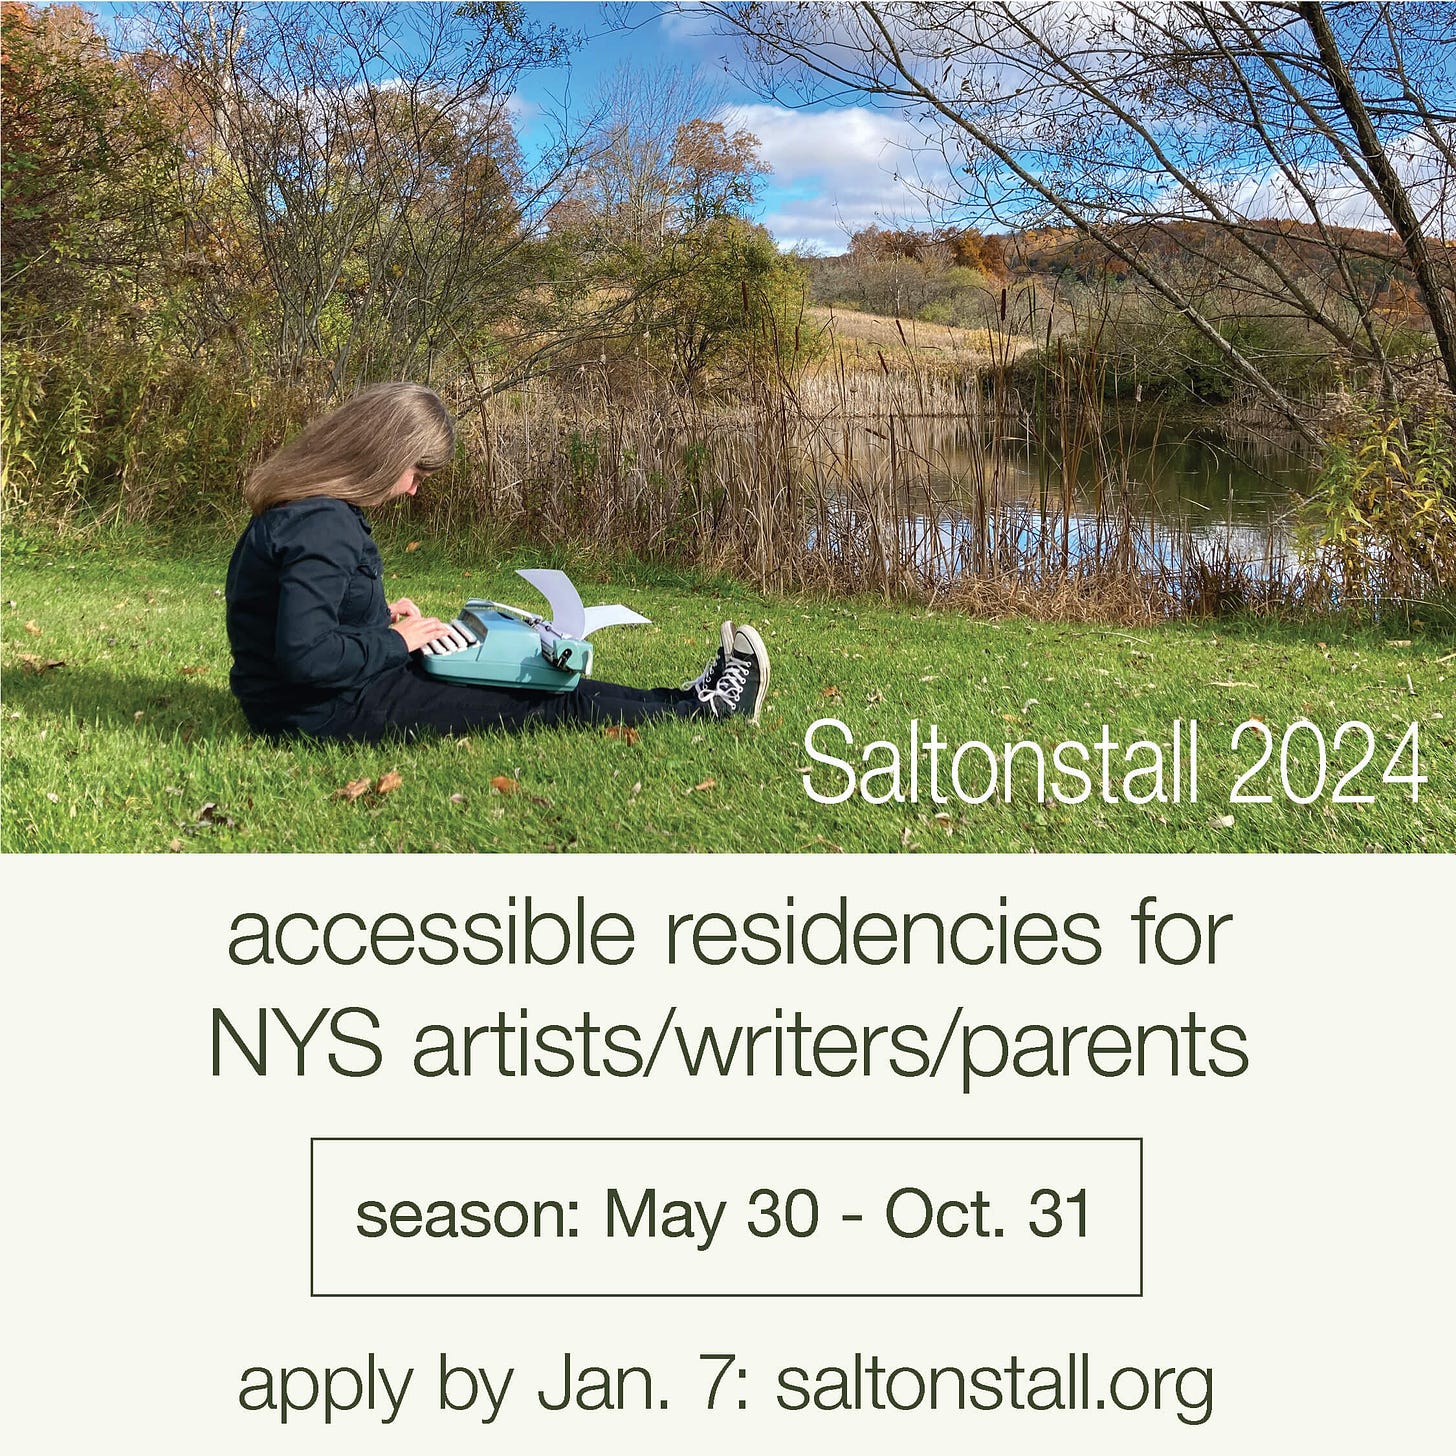 A femme person is sitting on grass near a pond with a typewriter in her lap. Text calls for applications for a residency program.